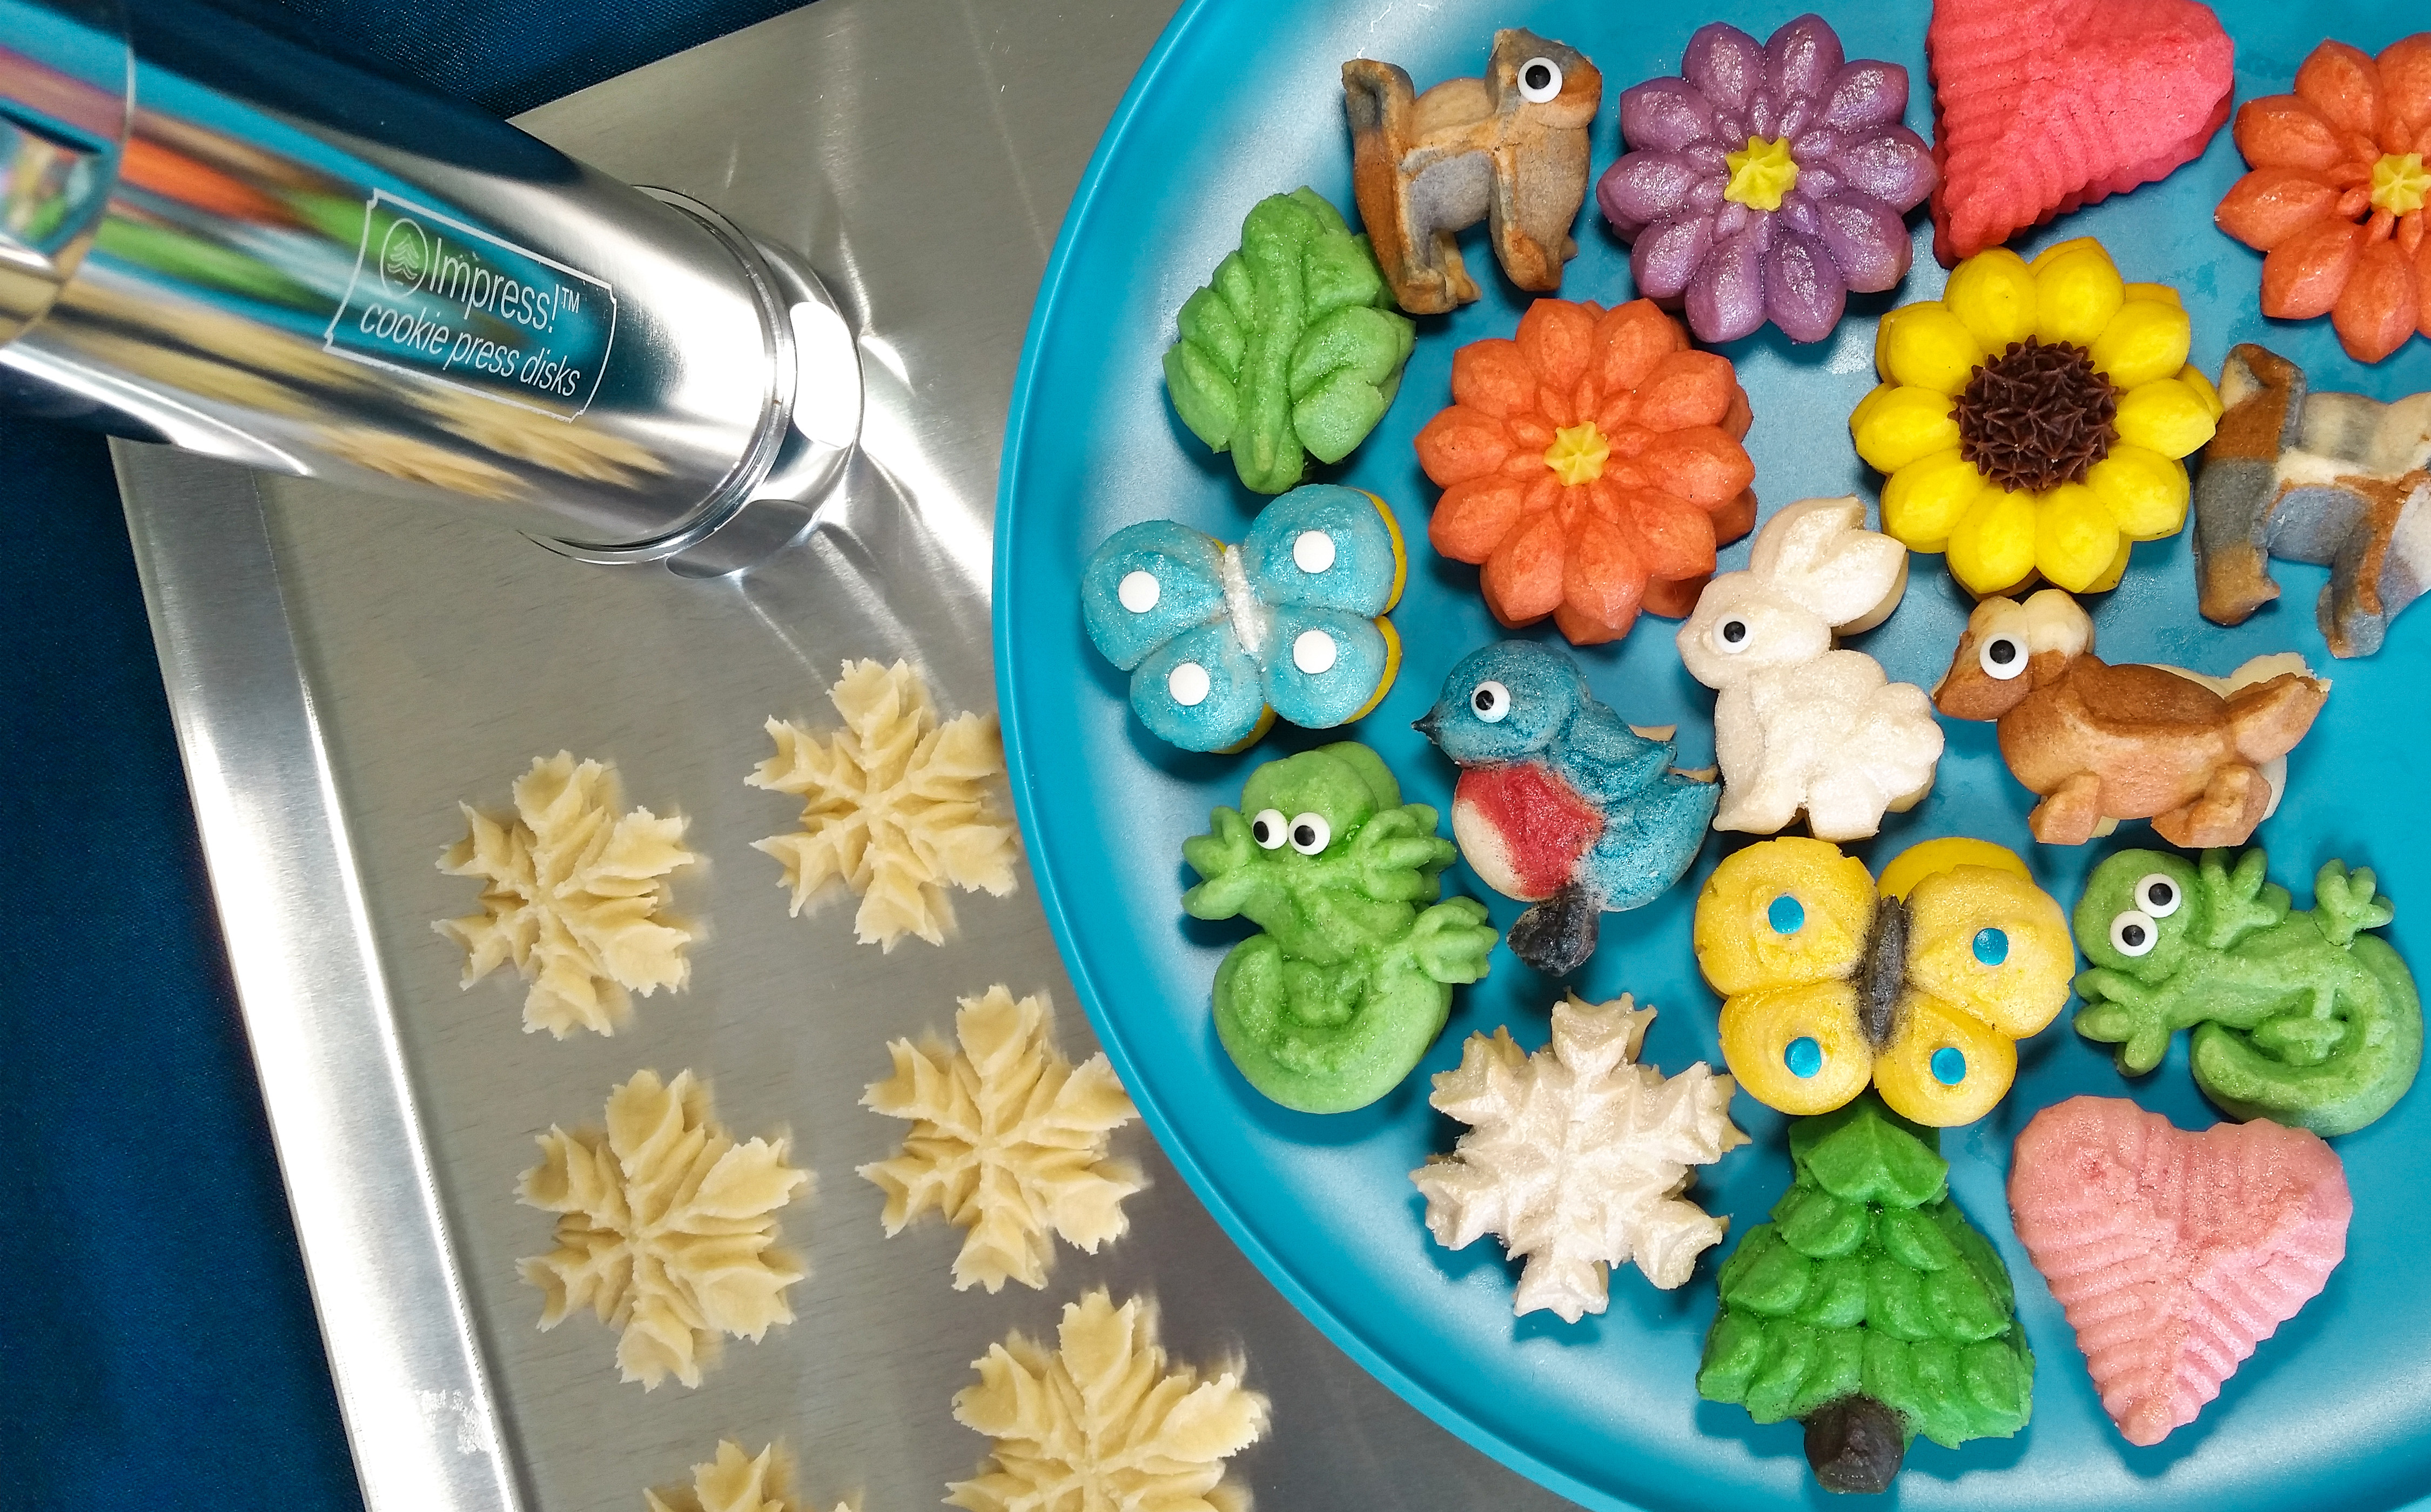 Impress! Bakeware Cookie Press and cookies made with 12 Disks © 2019 Impress Bakeware, LLCsms2